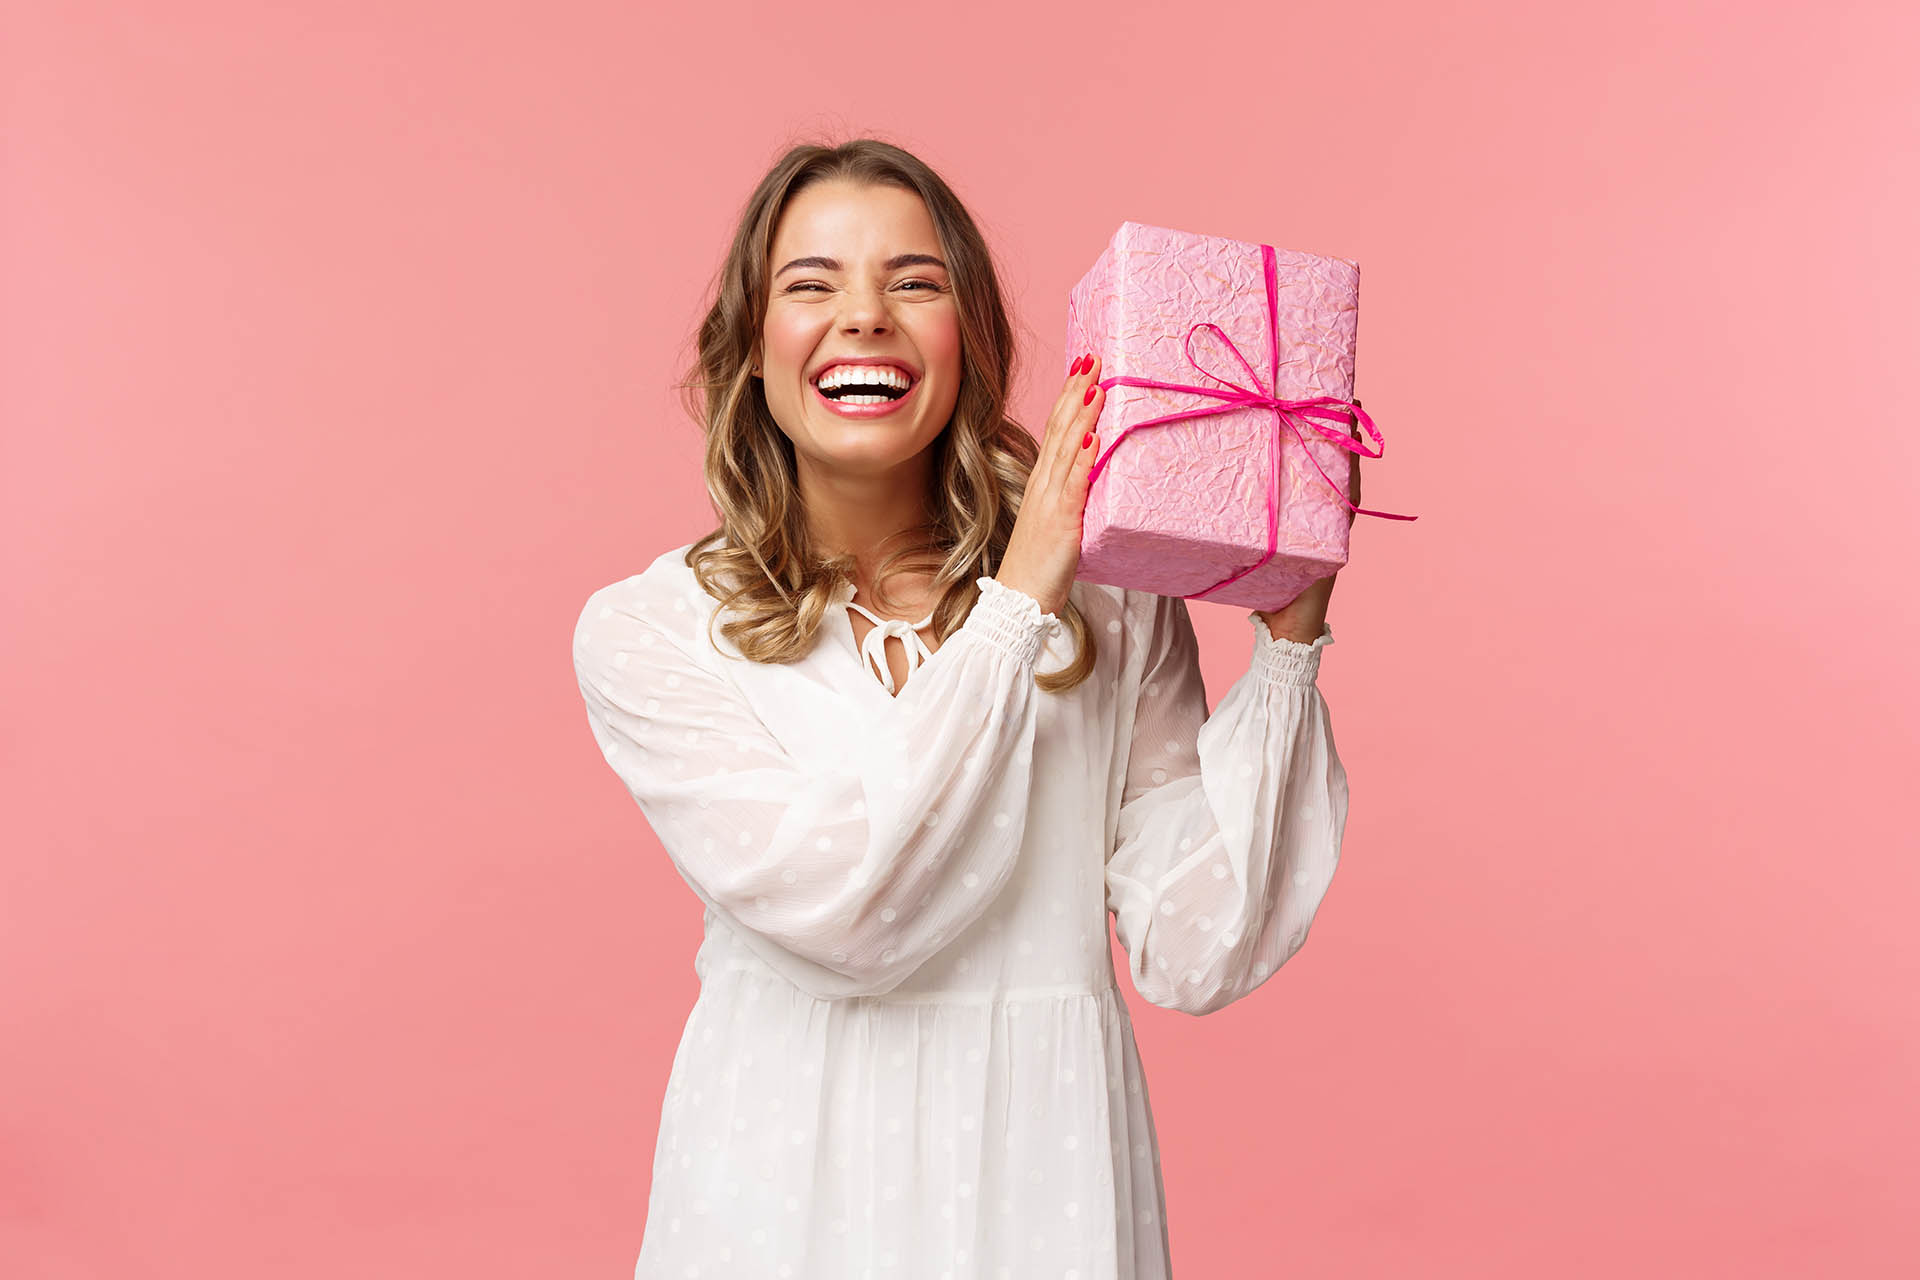 Gift Ideas Realtors Can Get Their Clients (For Closings or the Holidays)